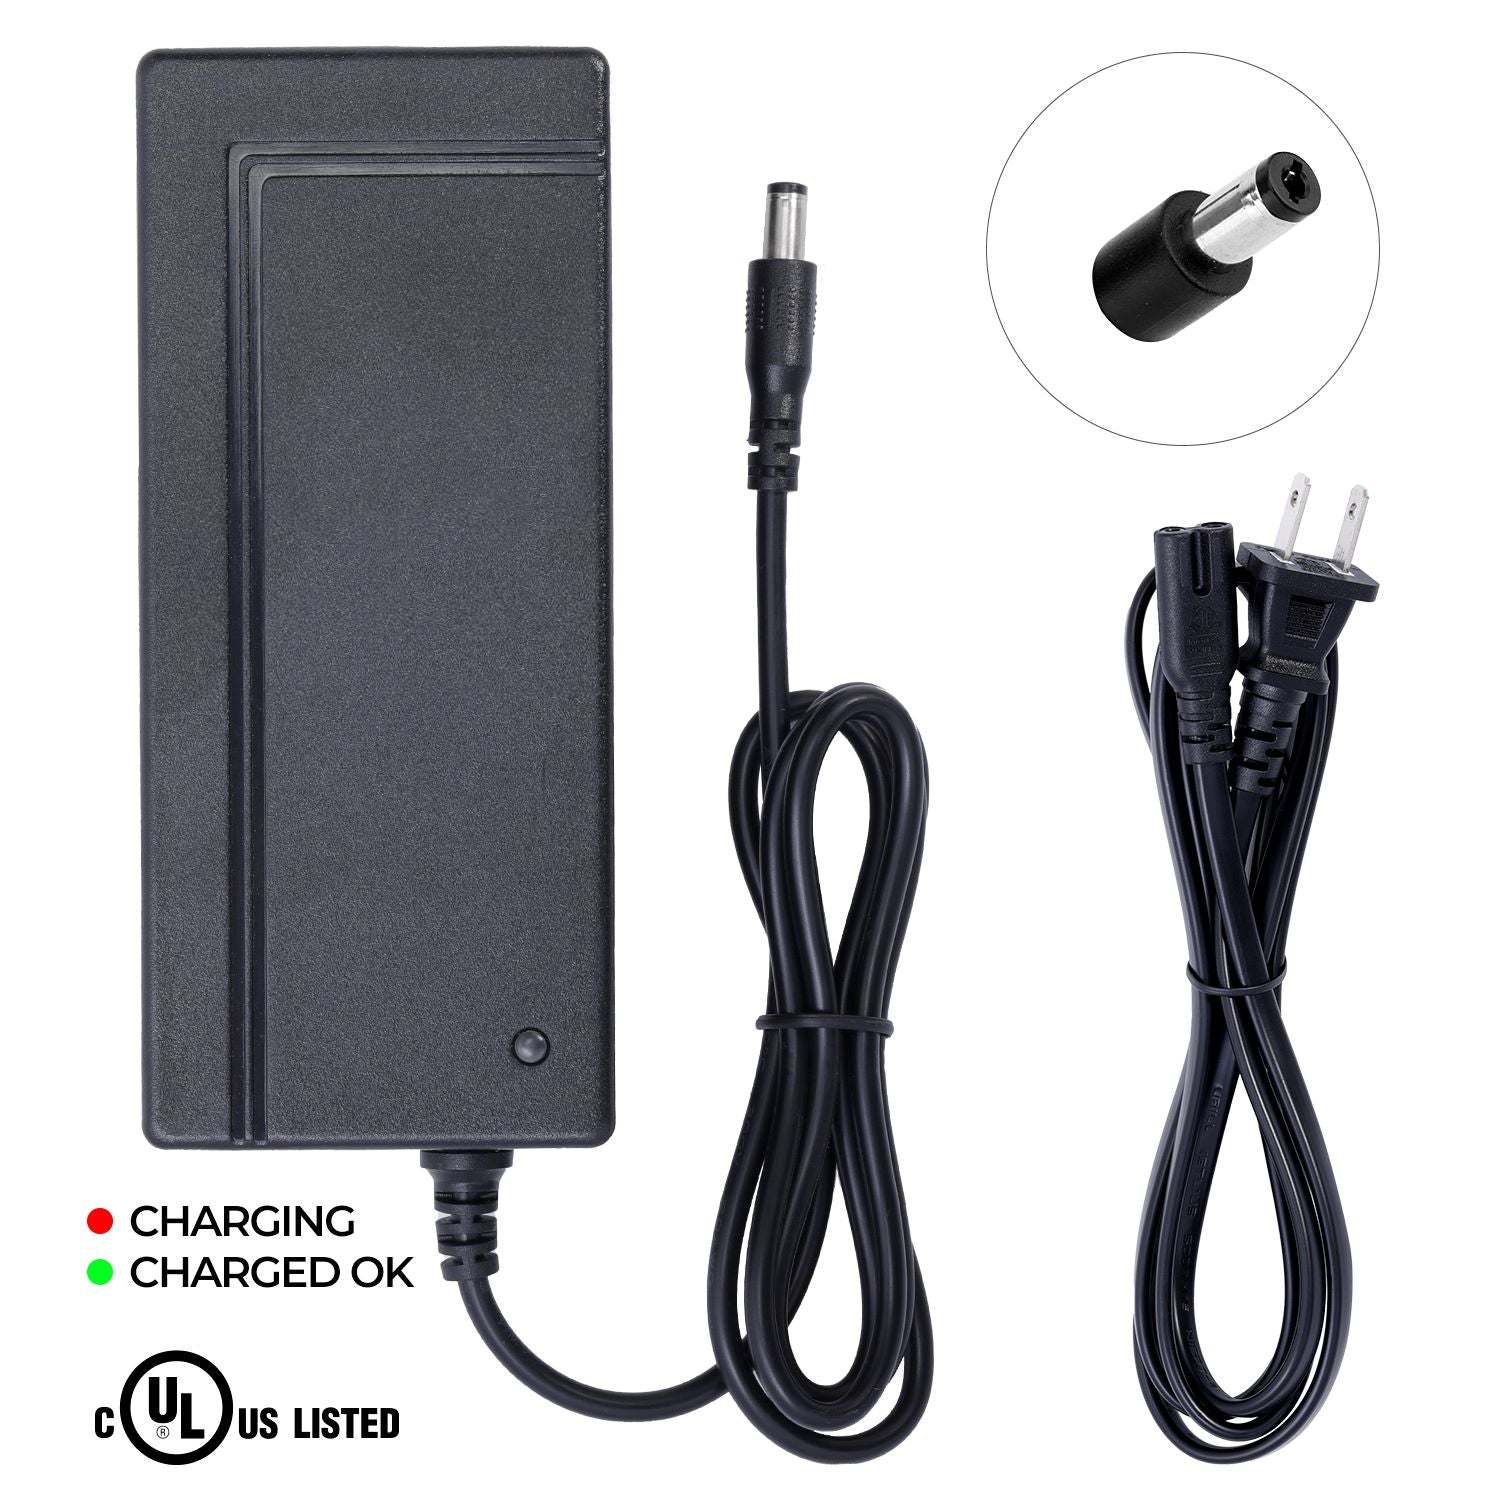 UL Listed Charger for Ridel XS1 Scooter (NOT for Other Models)